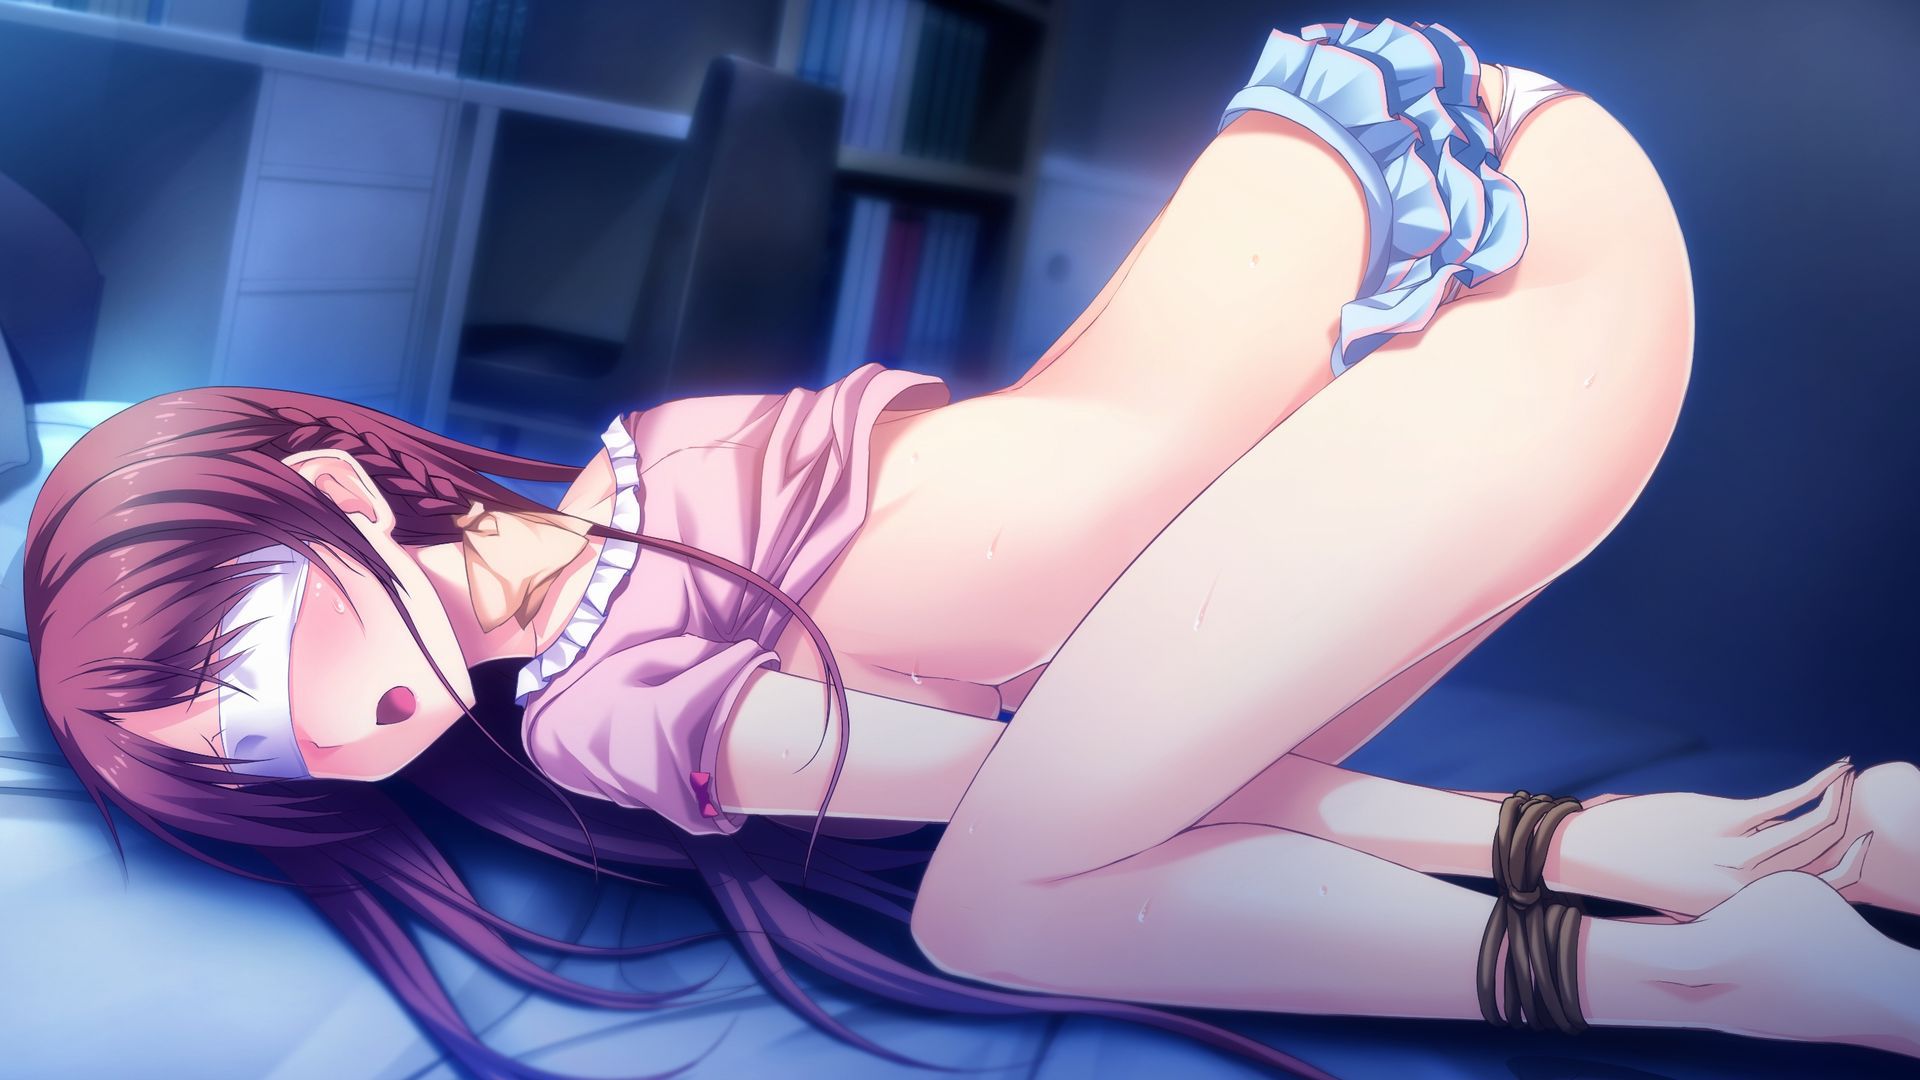 [2nd] Secondary erotic image of a girl who is in Estrus and is blindfolded [play blindfolded] 20